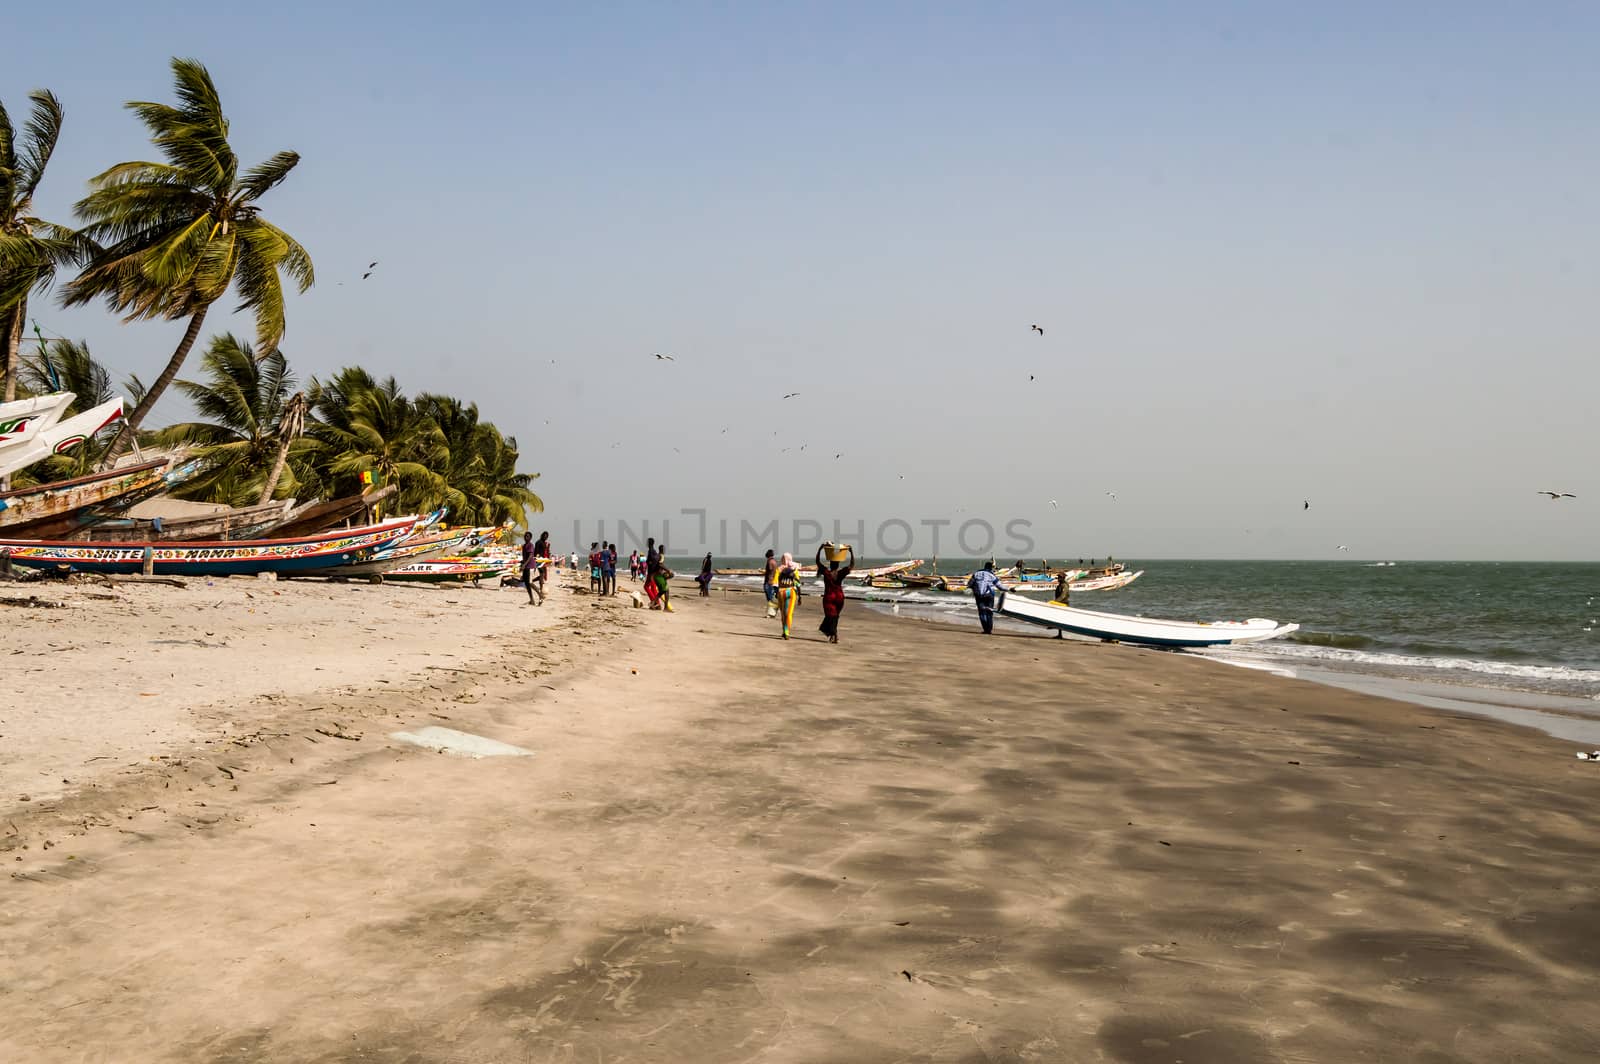 West africa gambia - view of the beach in port of banjul on a windy day